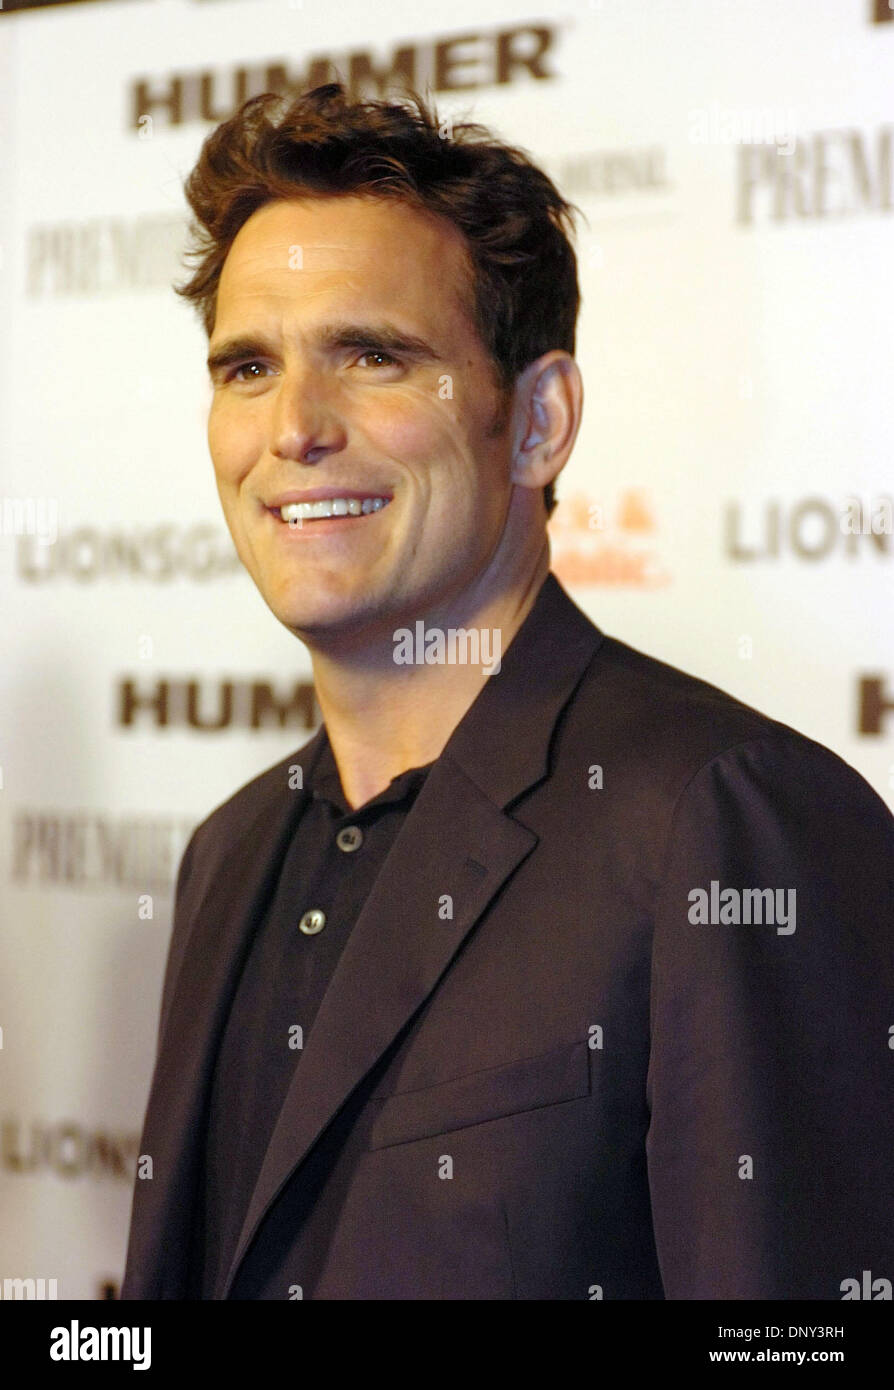 Jan 14, 2006; Beverly Hills, CA, USA; Actor MATT DILLON attends the party held by Showtime and Lionsgate Films to celebrate The Golden Globe nominated movies 'Weeds' and 'Crash' held at Morton's Restaurant in Beverly Hills.  Mandatory Credit: Photo by Rob DeLorenzo/ZUMA Press. (©) Copyright 2006 by Rob DeLorenzo Stock Photo